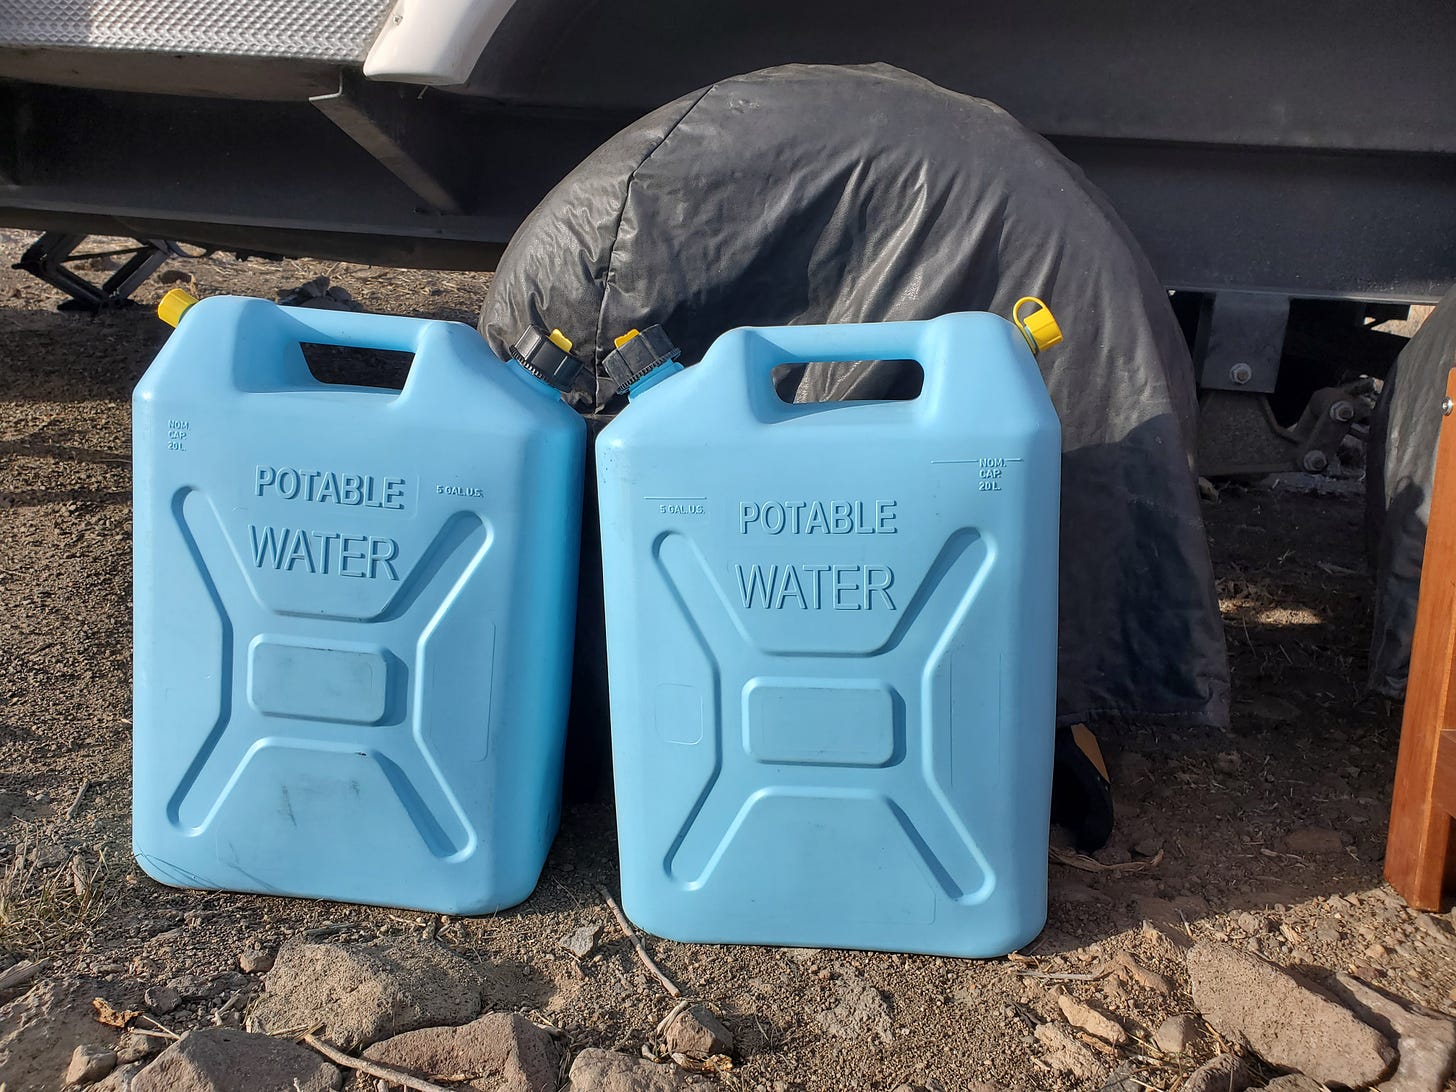 Two blue plastic containers that say Potable Water on the ground in front of a wheel of the travel trailer.